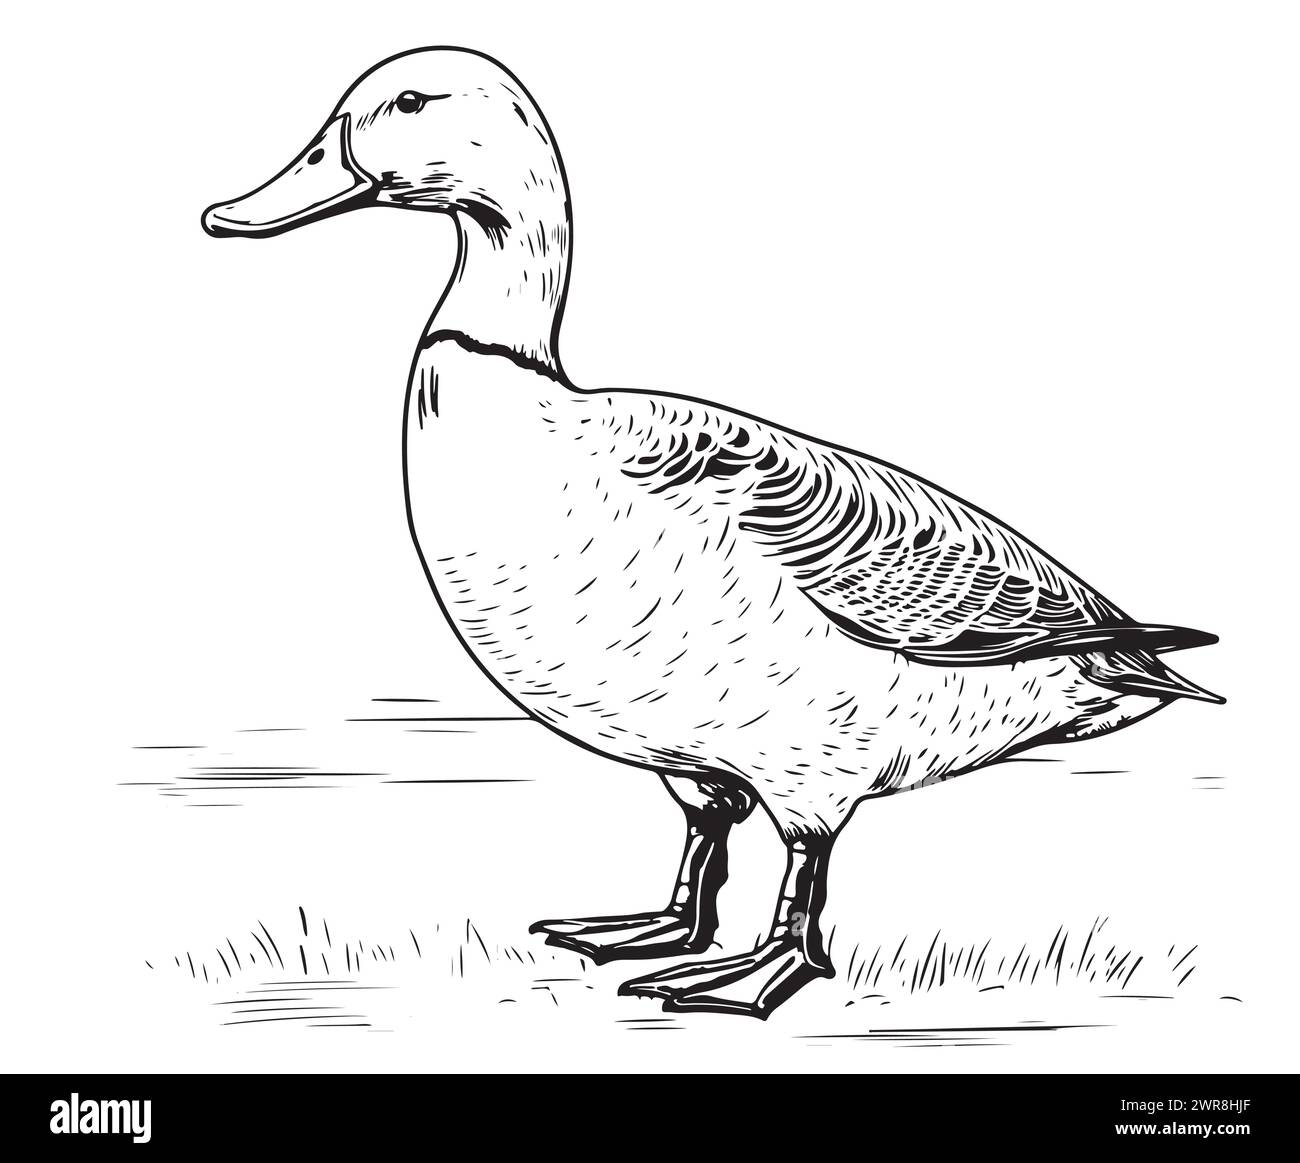 Hand drawn duck animal vector illustration. Sketch isolated on white background with pencil and label banner Stock Vector